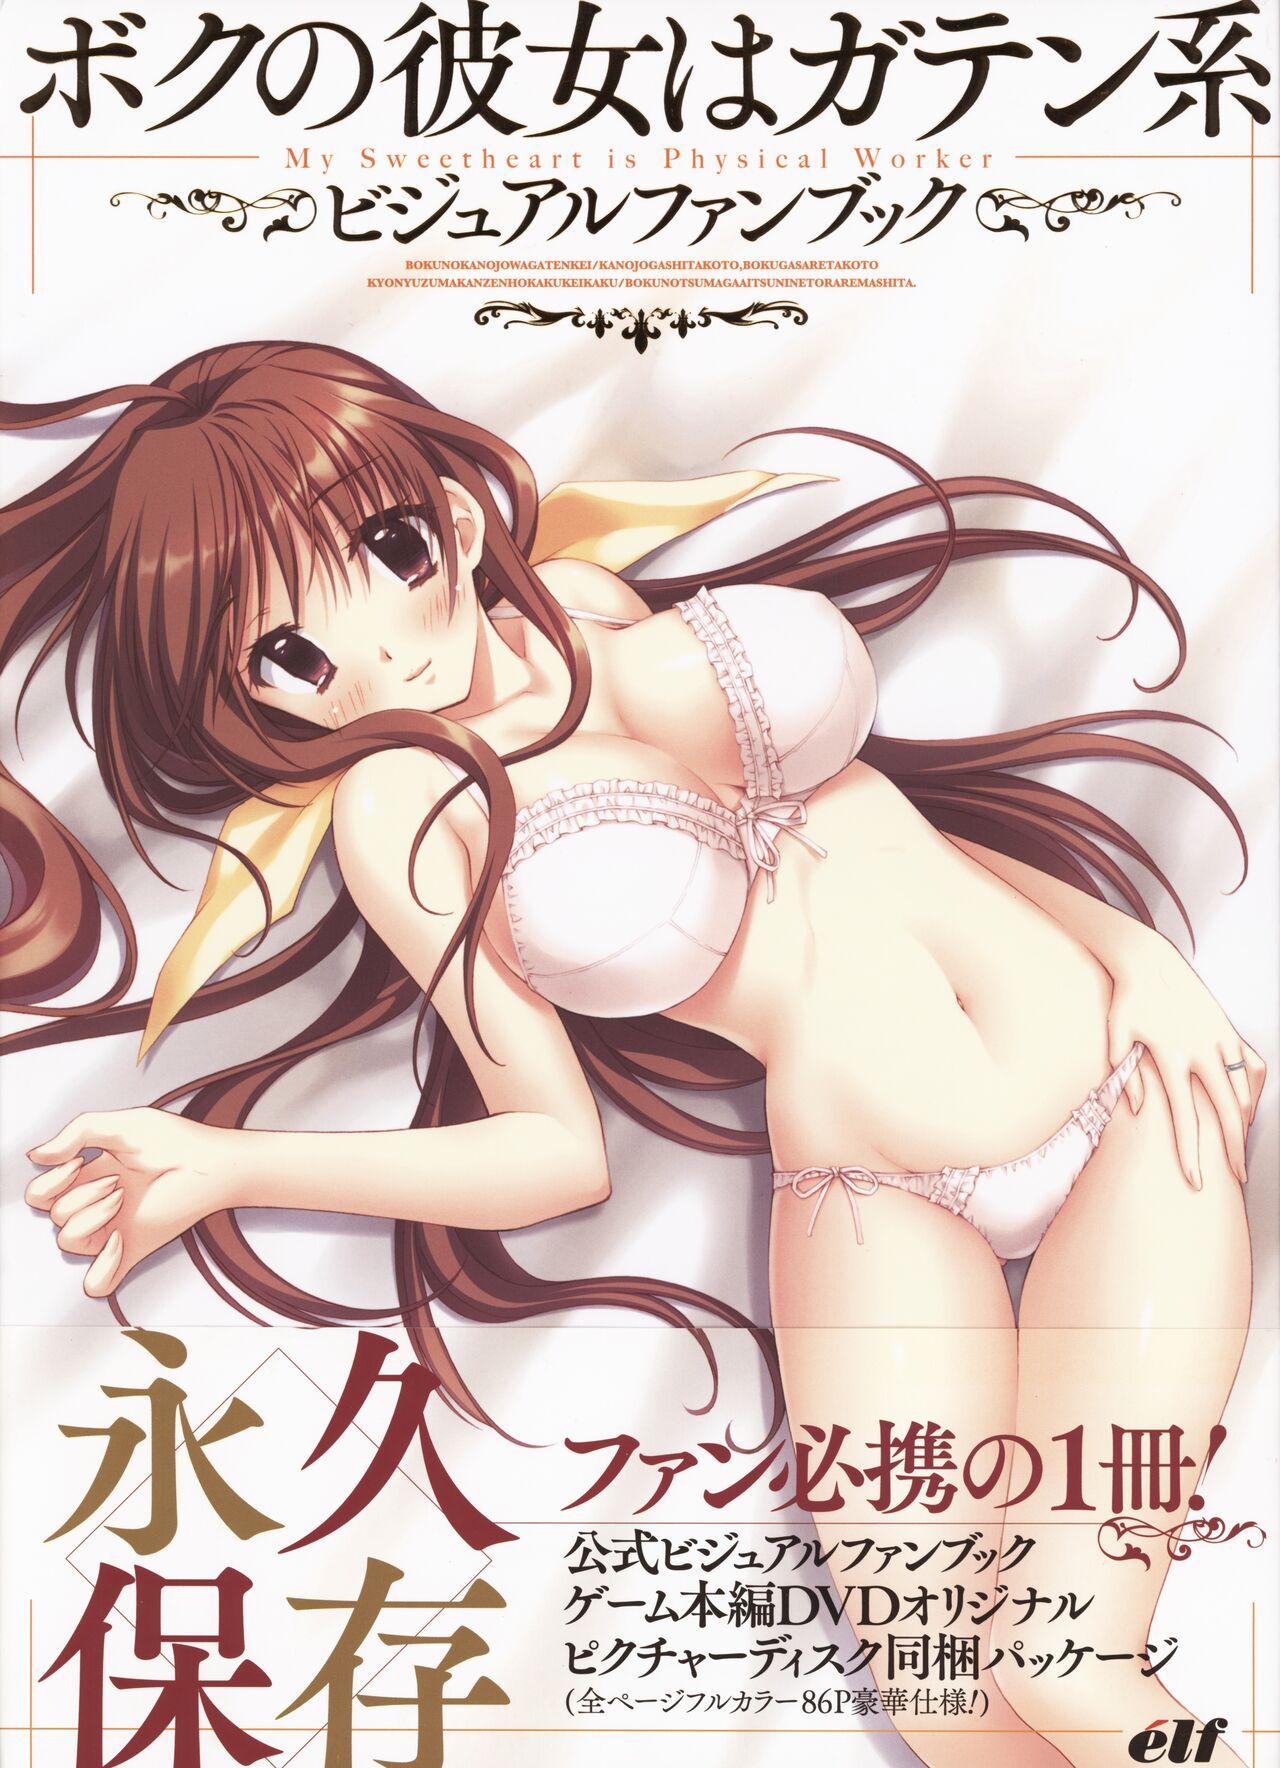 Menage My Sweetheart is Physical Worker VISUAL FAN BOOK Petite Teen - Picture 1